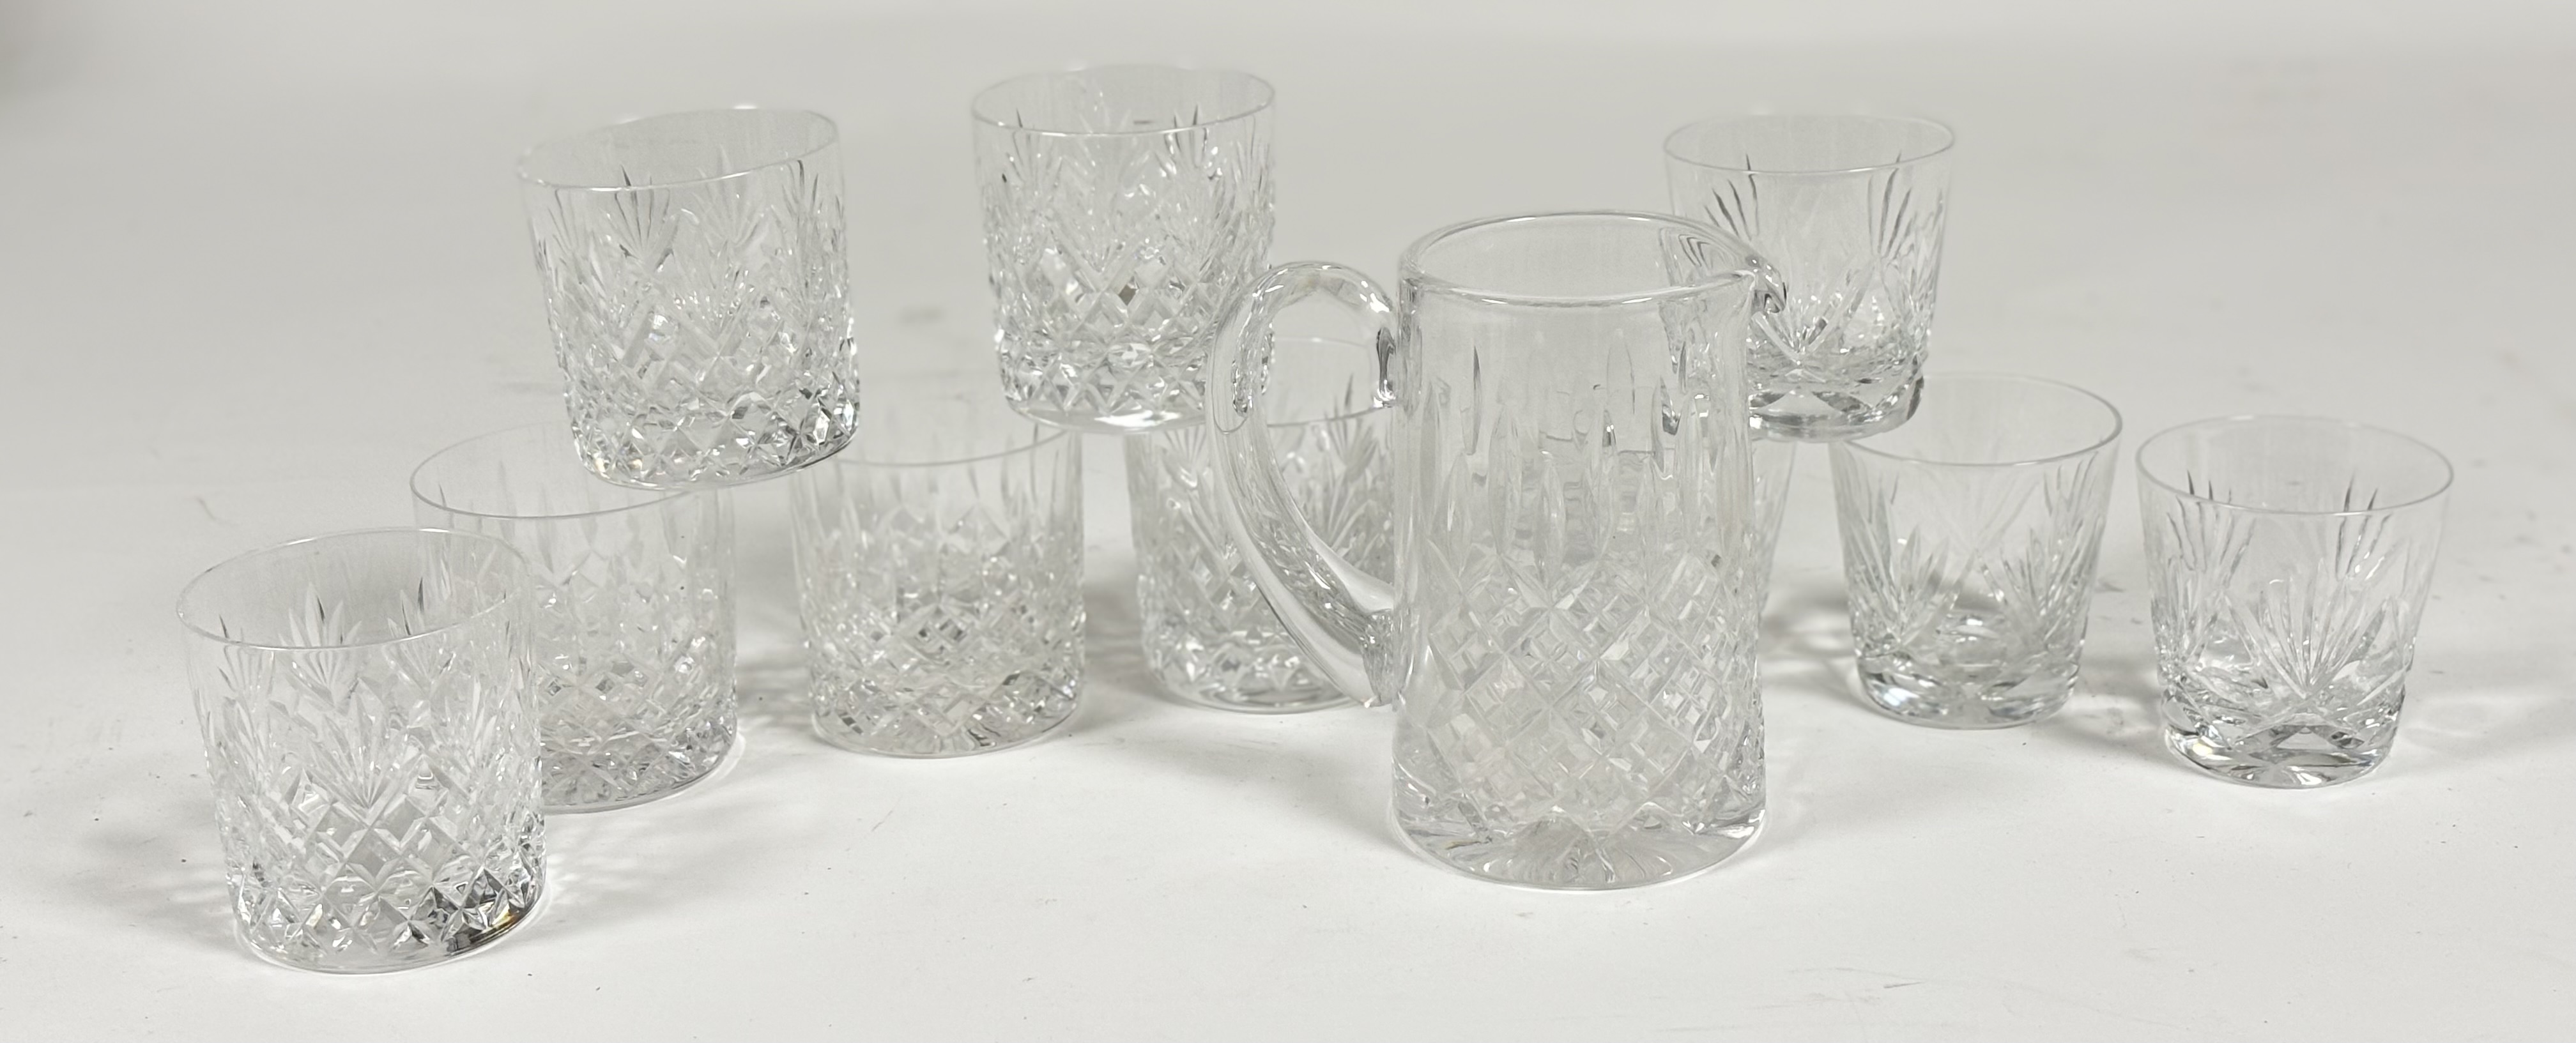 A collection of crystal ware, a set of six tumblers (w-8.5cm), four whisky glasses (h-8cm) and a